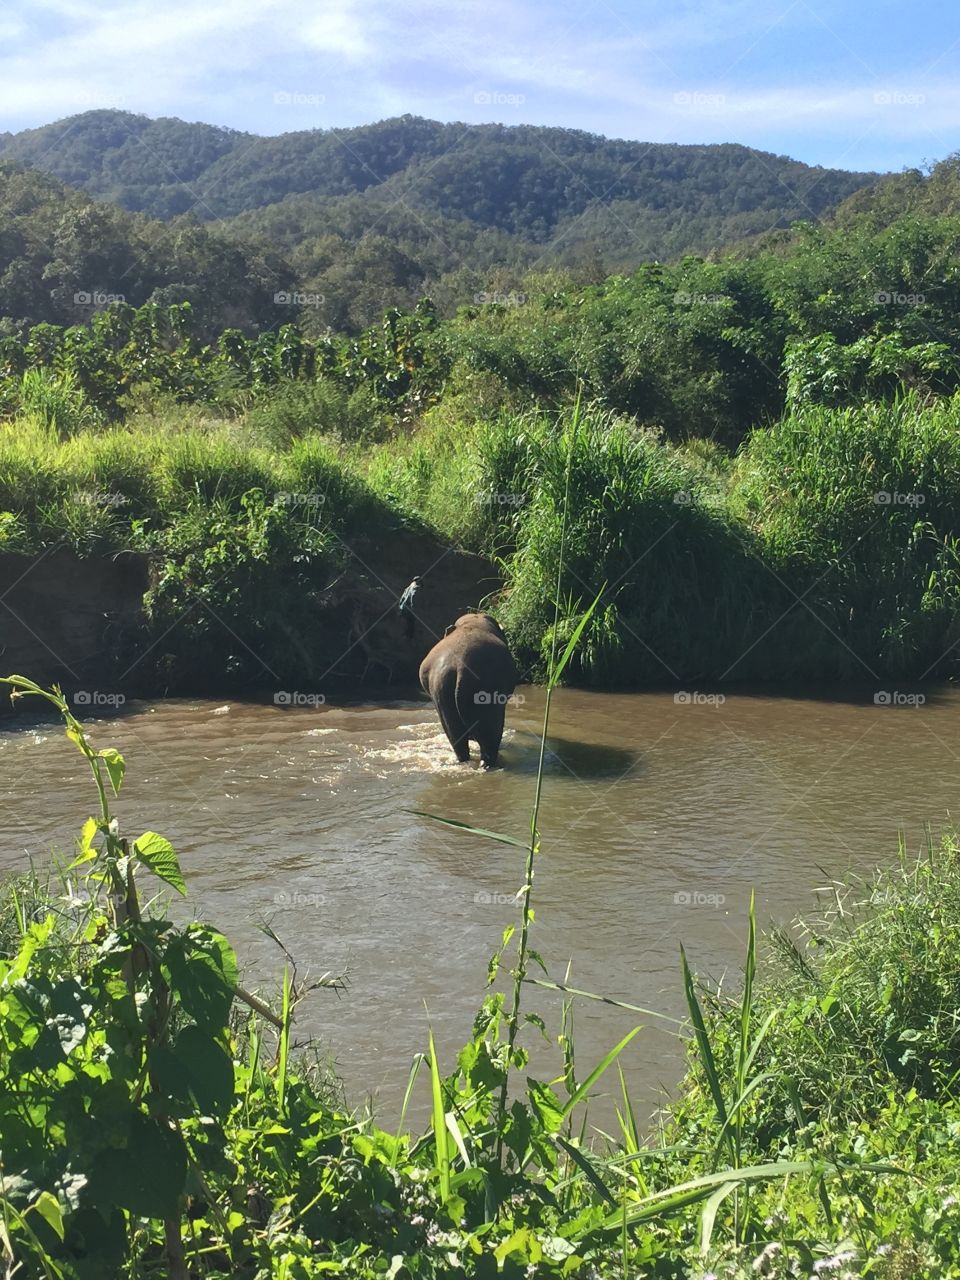 A 26 month pregnant elephant makes her way across the river in Northern Thailand. She was rescued from a life of logging and spends her days exploring the forest